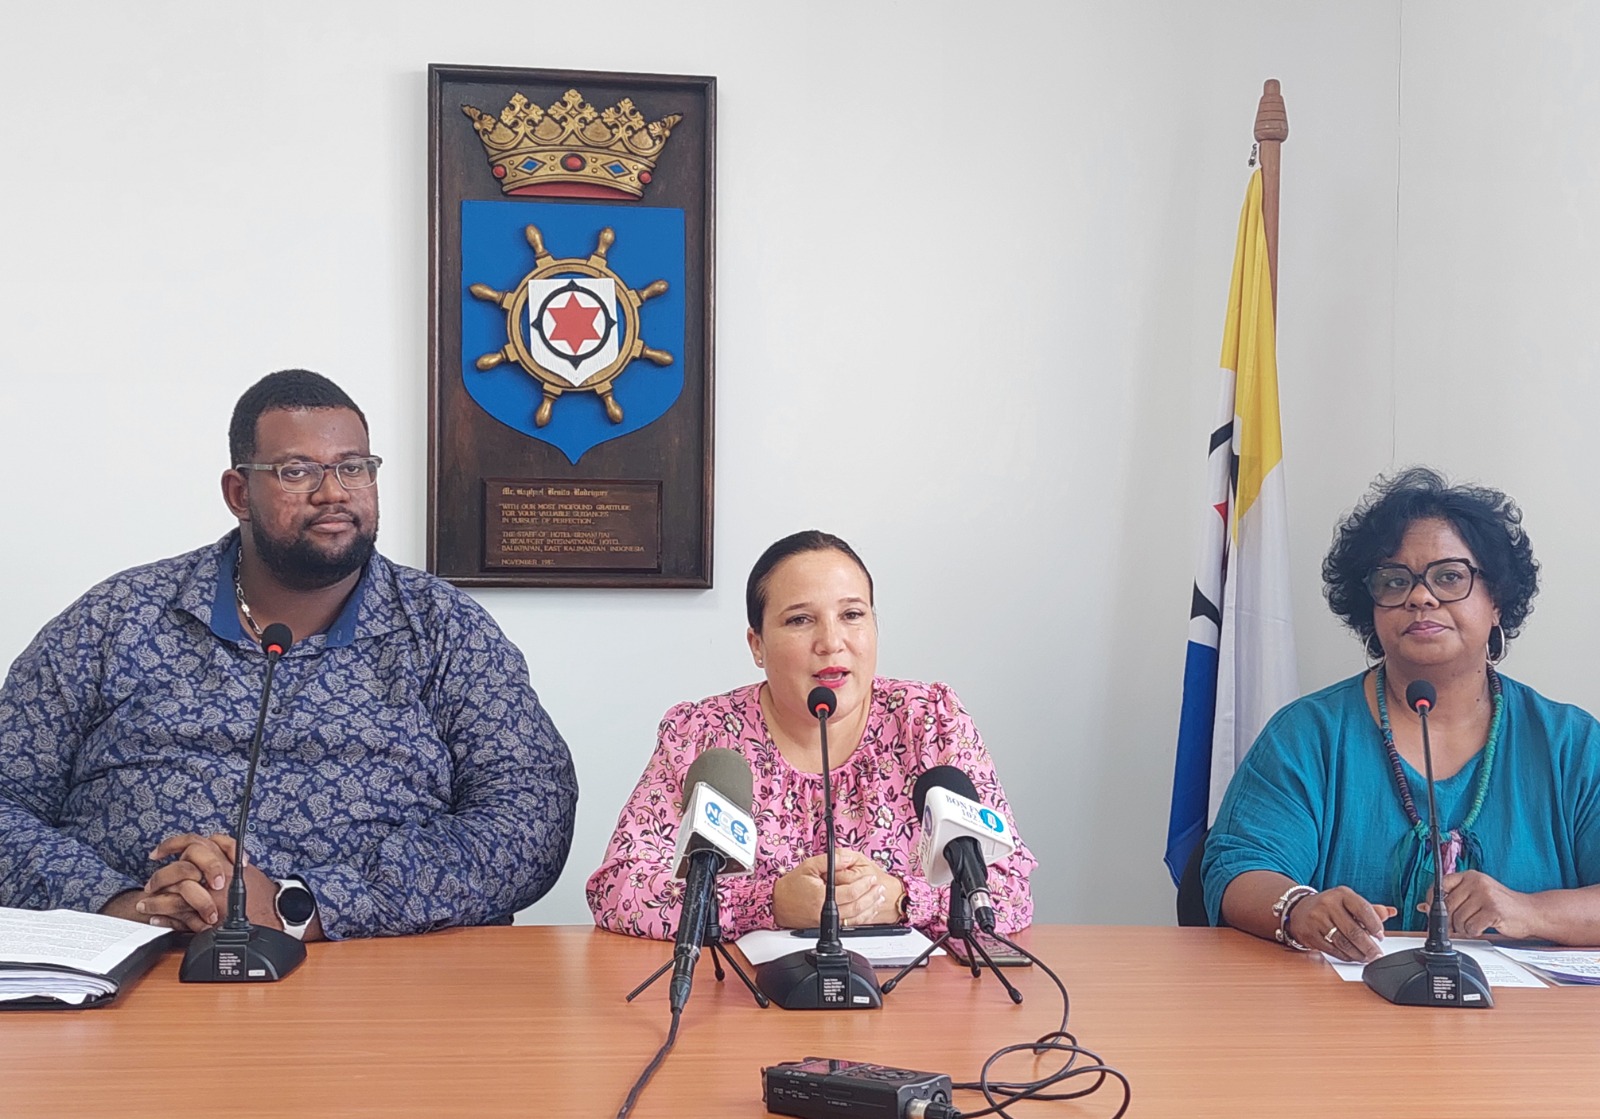 Over 700 applications for power subsidy on Bonaire